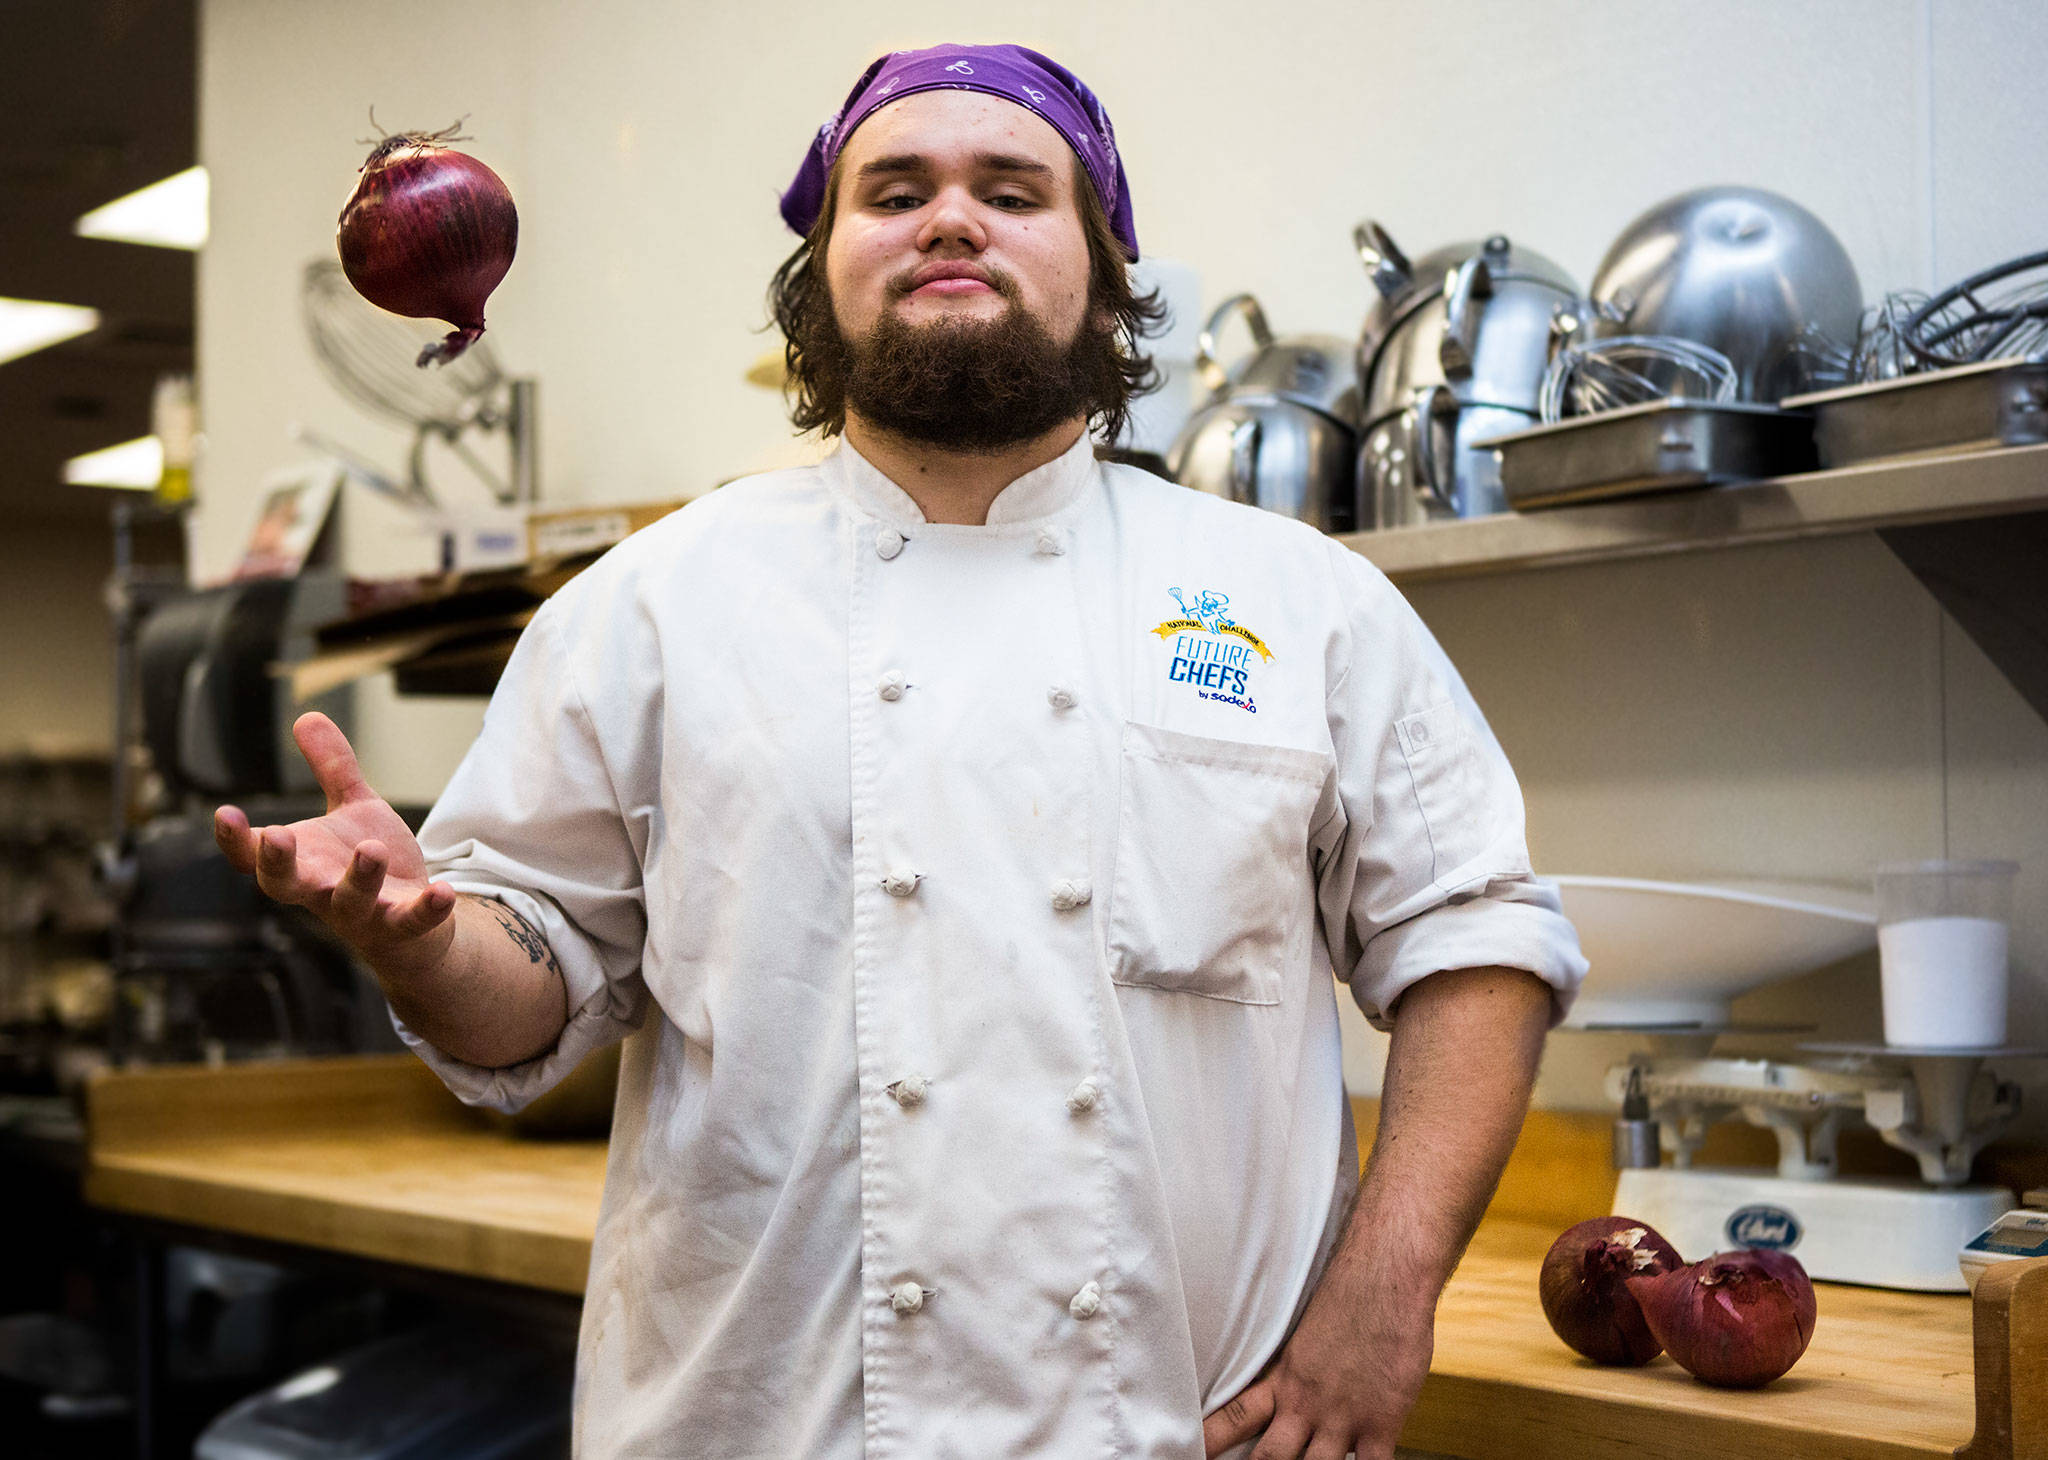 Andrew “Roo” Strom, seen here in the culinary classroom at Sno-Isle TECH Center in Everett, starts Monday at Carnation Farms as a chef’s assistant. He hopes to open his own gastropub someday. (Olivia Vanni / The Herald)